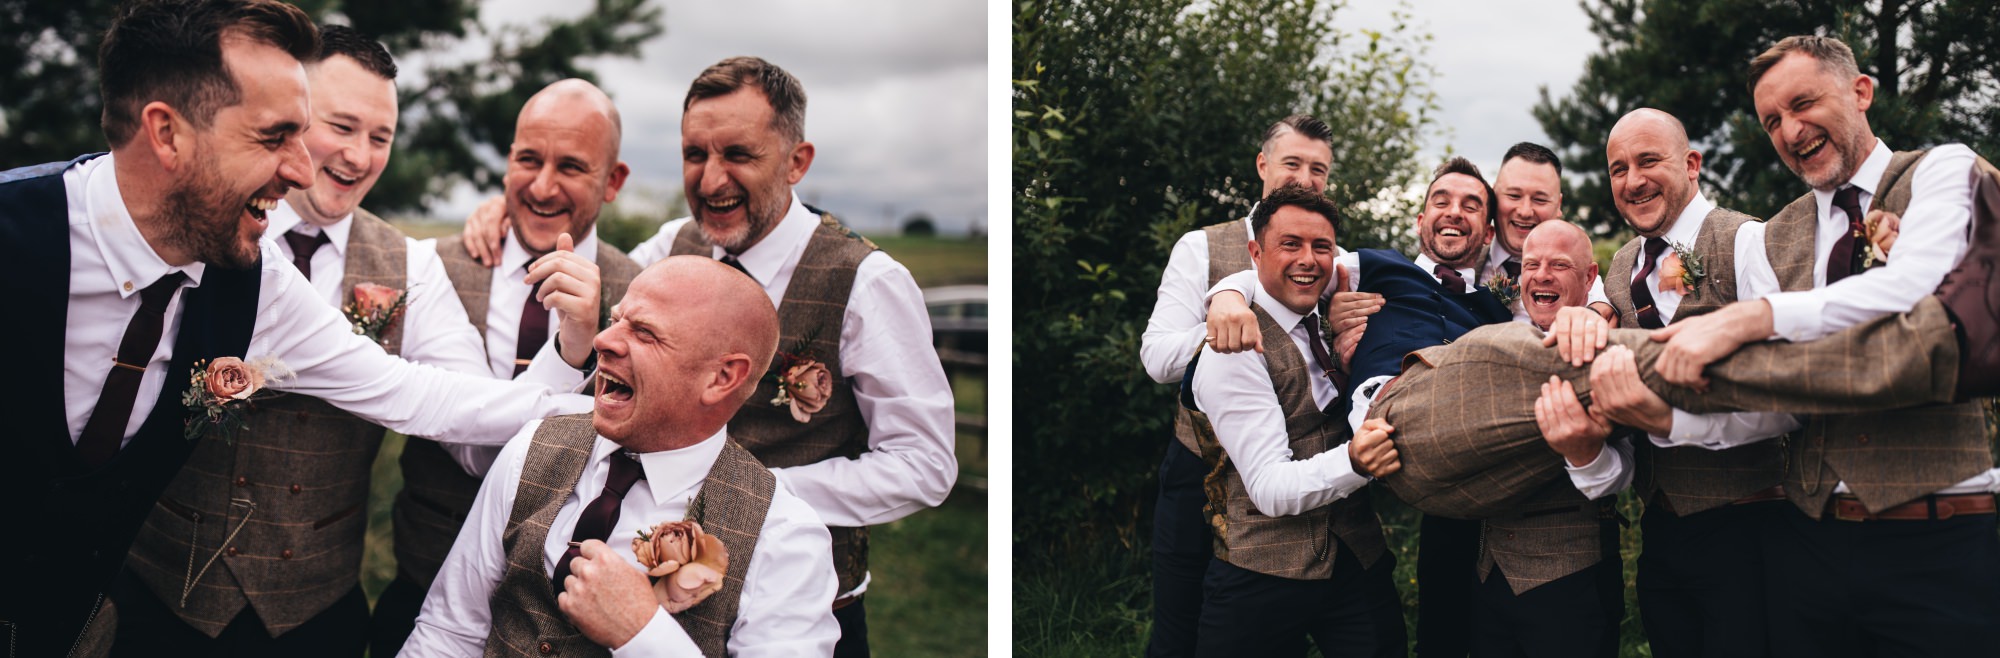 groom with friends as they lift him up messing about and laughing